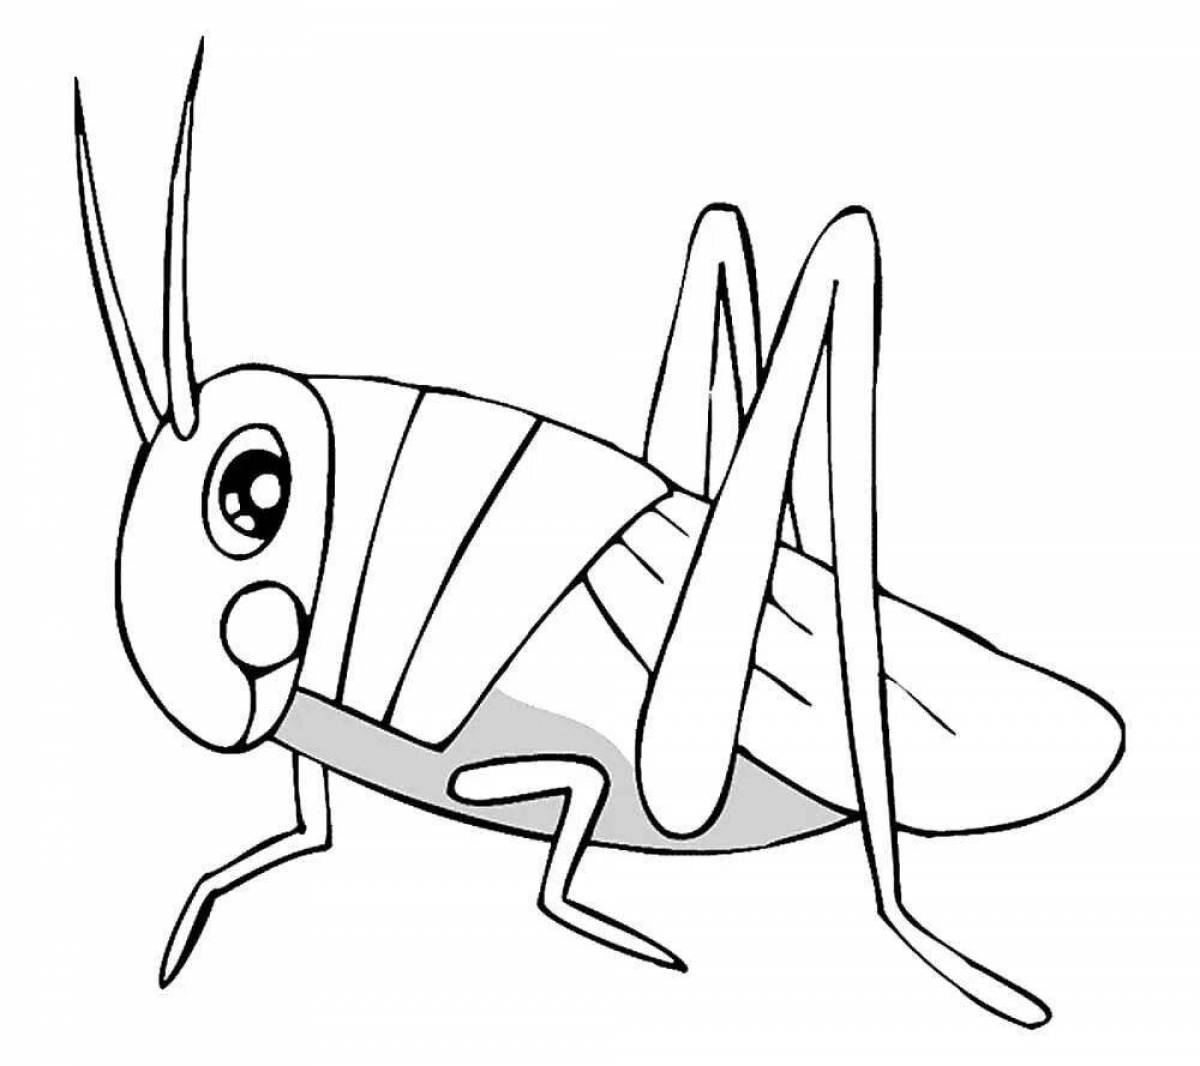 Spectacular beetle coloring book for 3-4 year olds